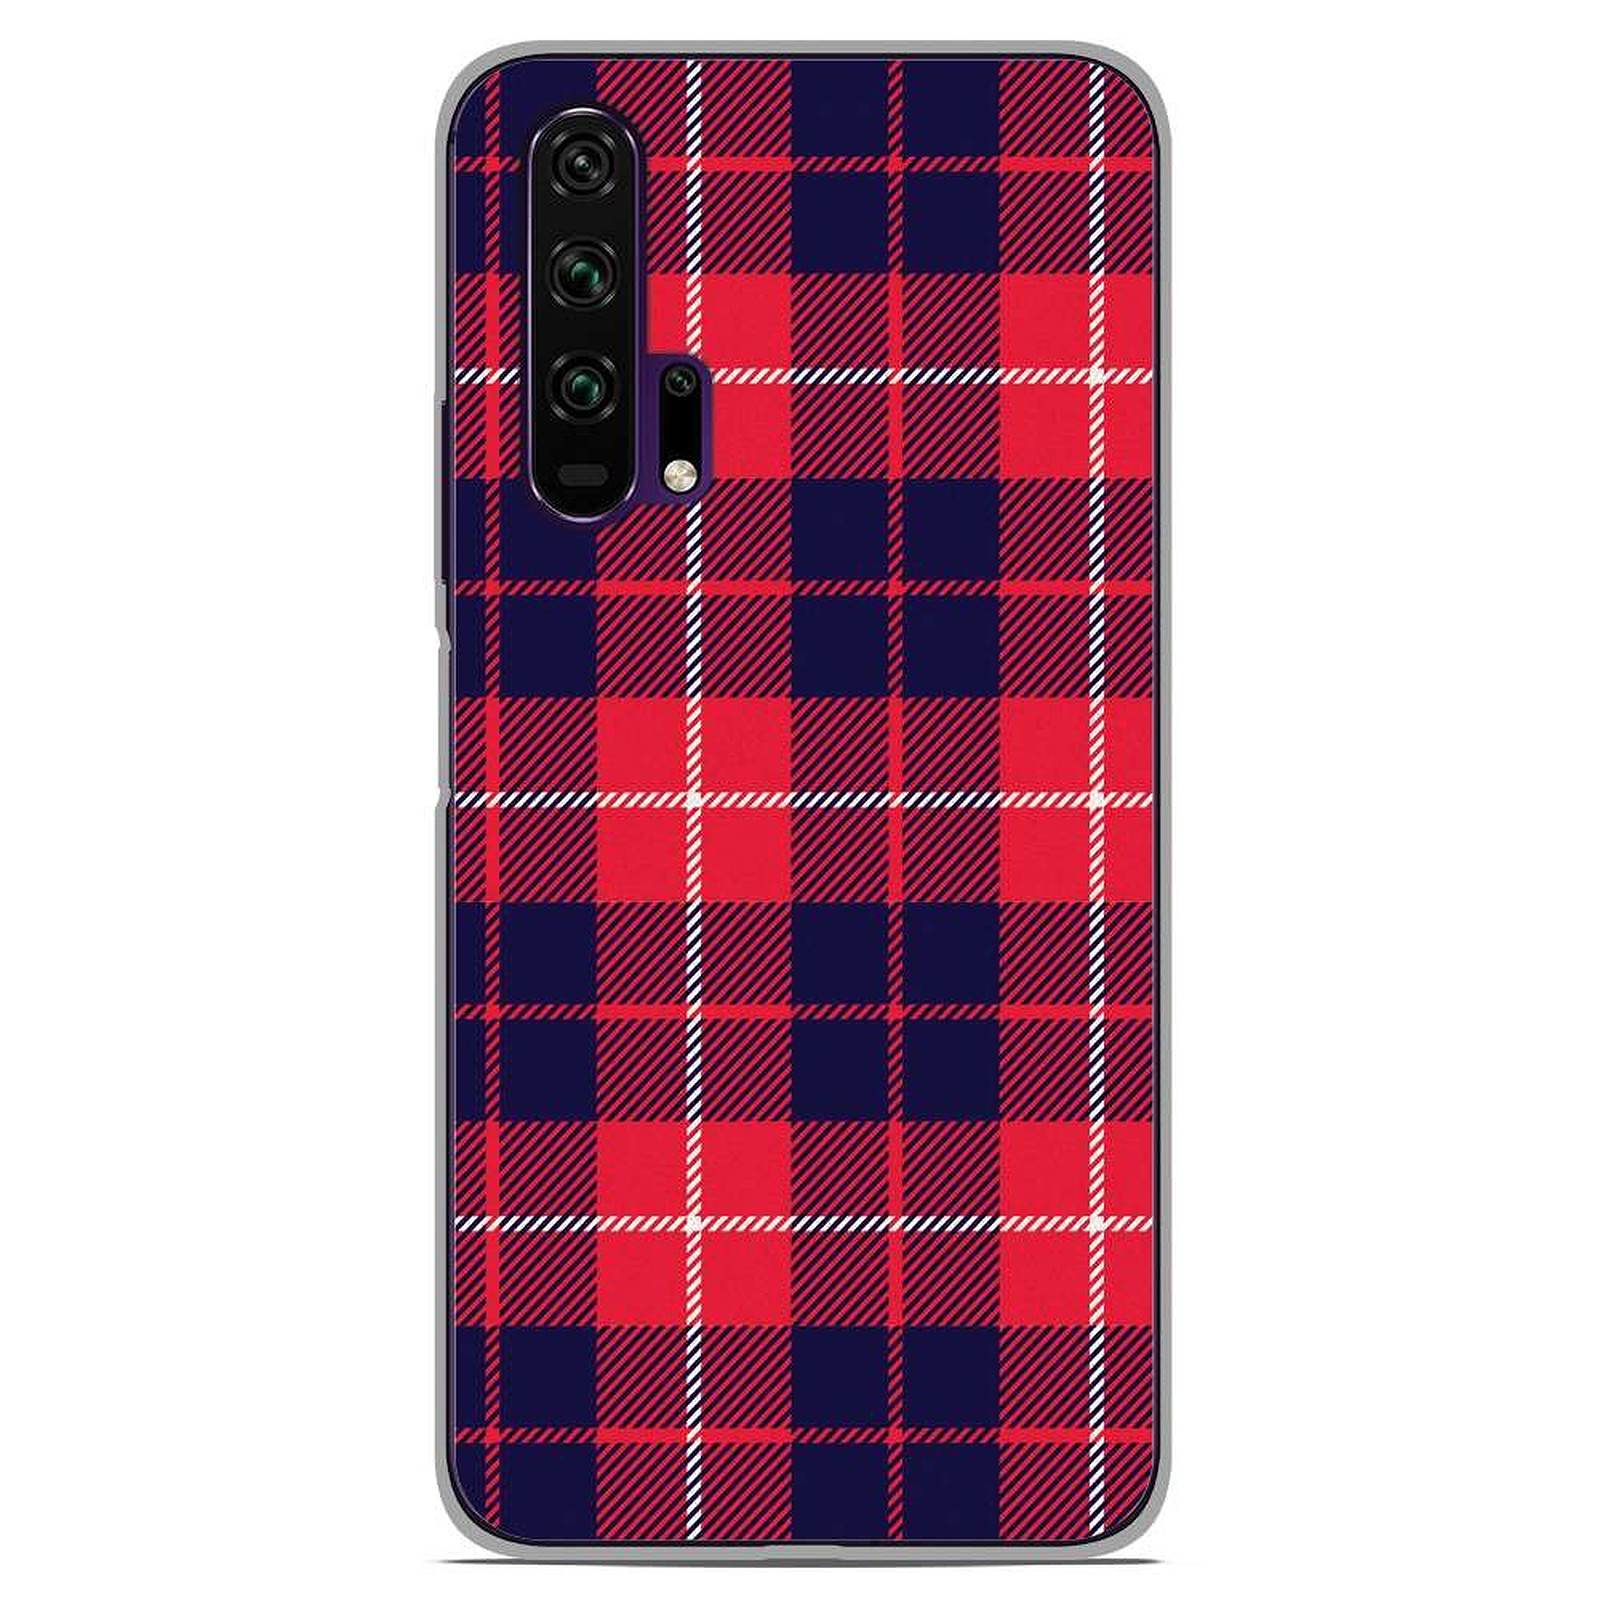 1001 Coques Coque silicone gel Huawei Honor 20 Pro motif Tartan Rouge 2 - Coque telephone 1001Coques